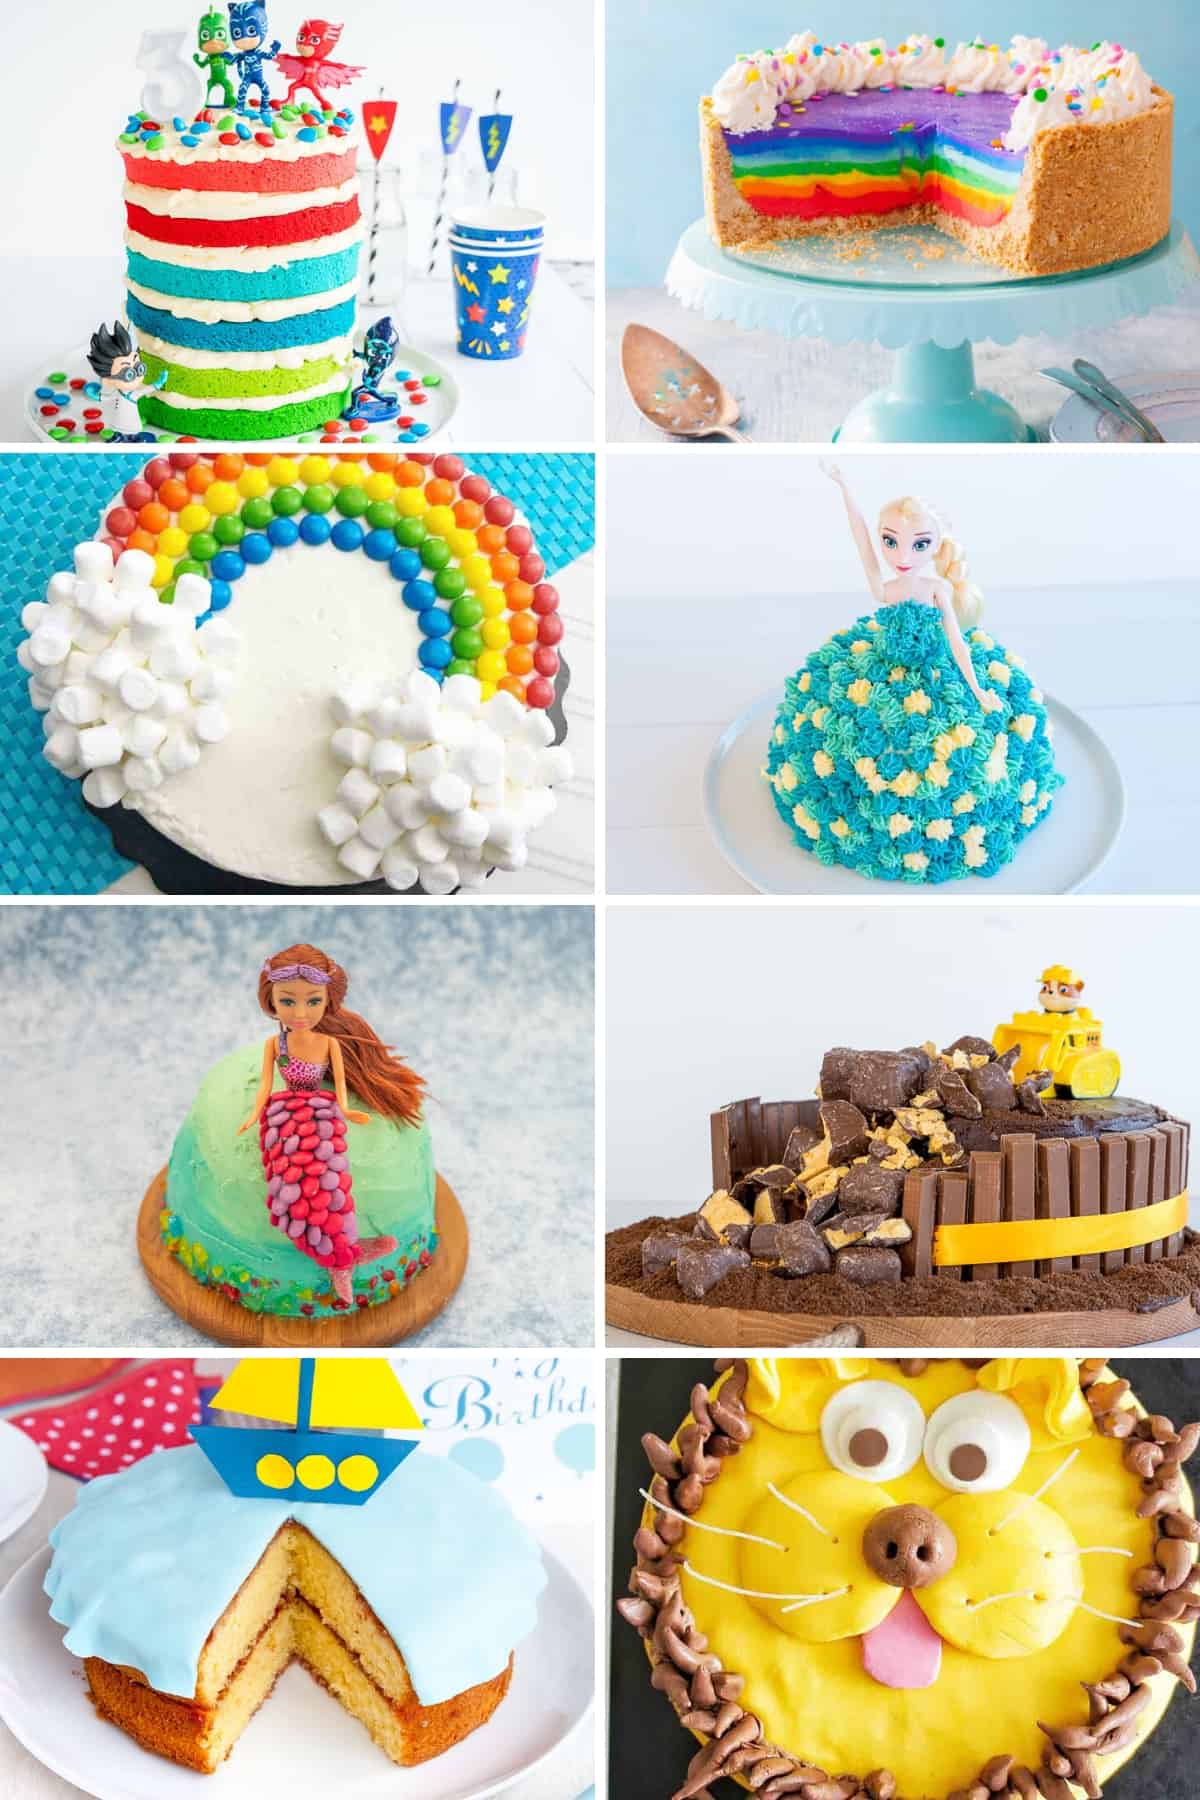 I. Introduction to creative ideas for children's birthday cakes